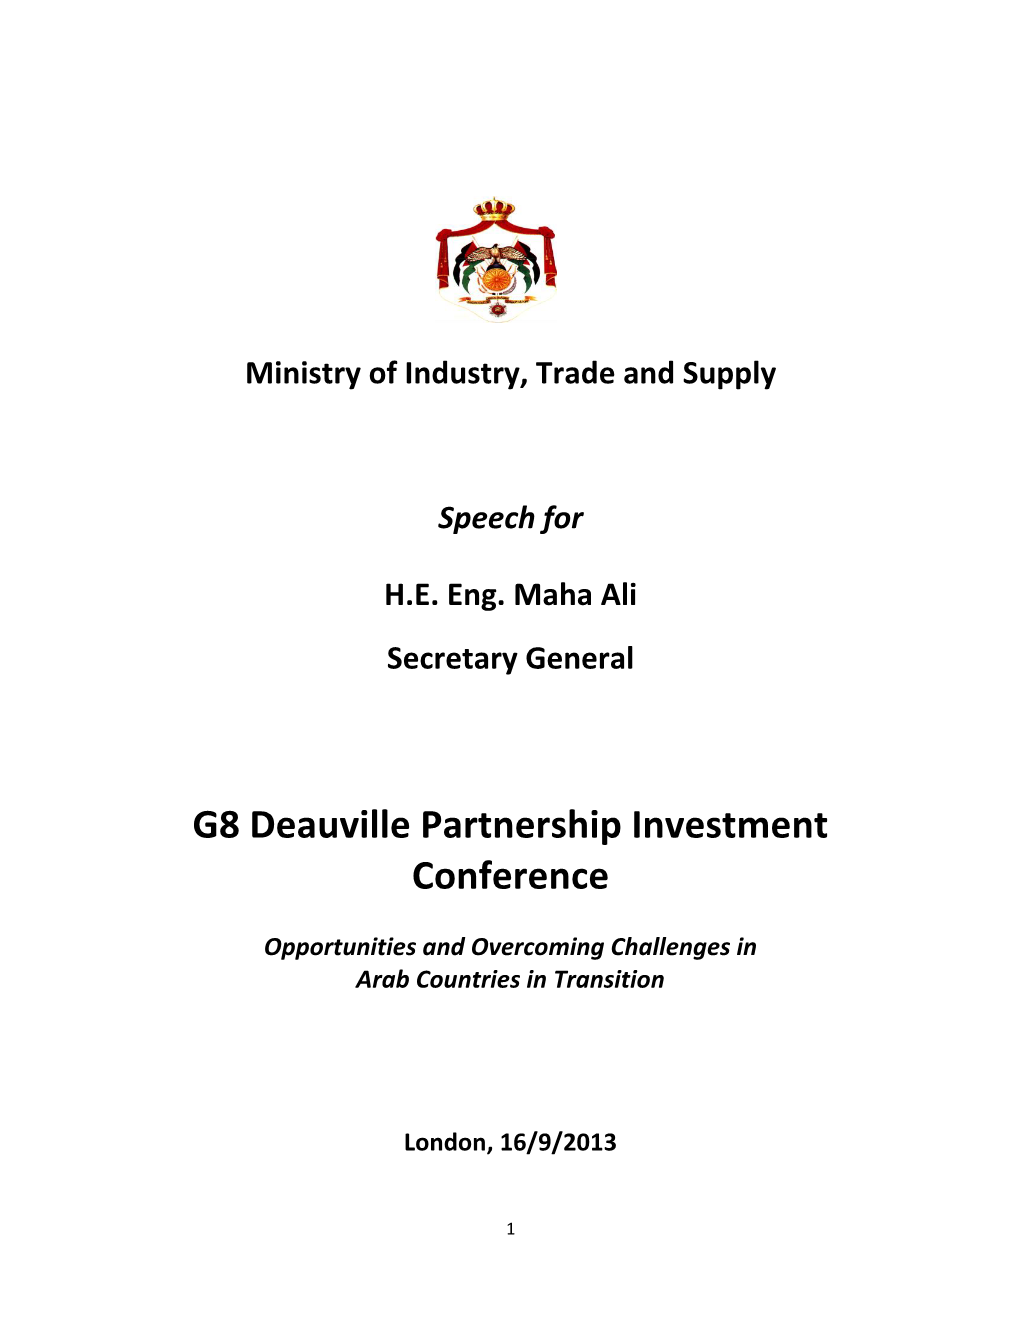 G8 Deauville Partnership Investment Conference